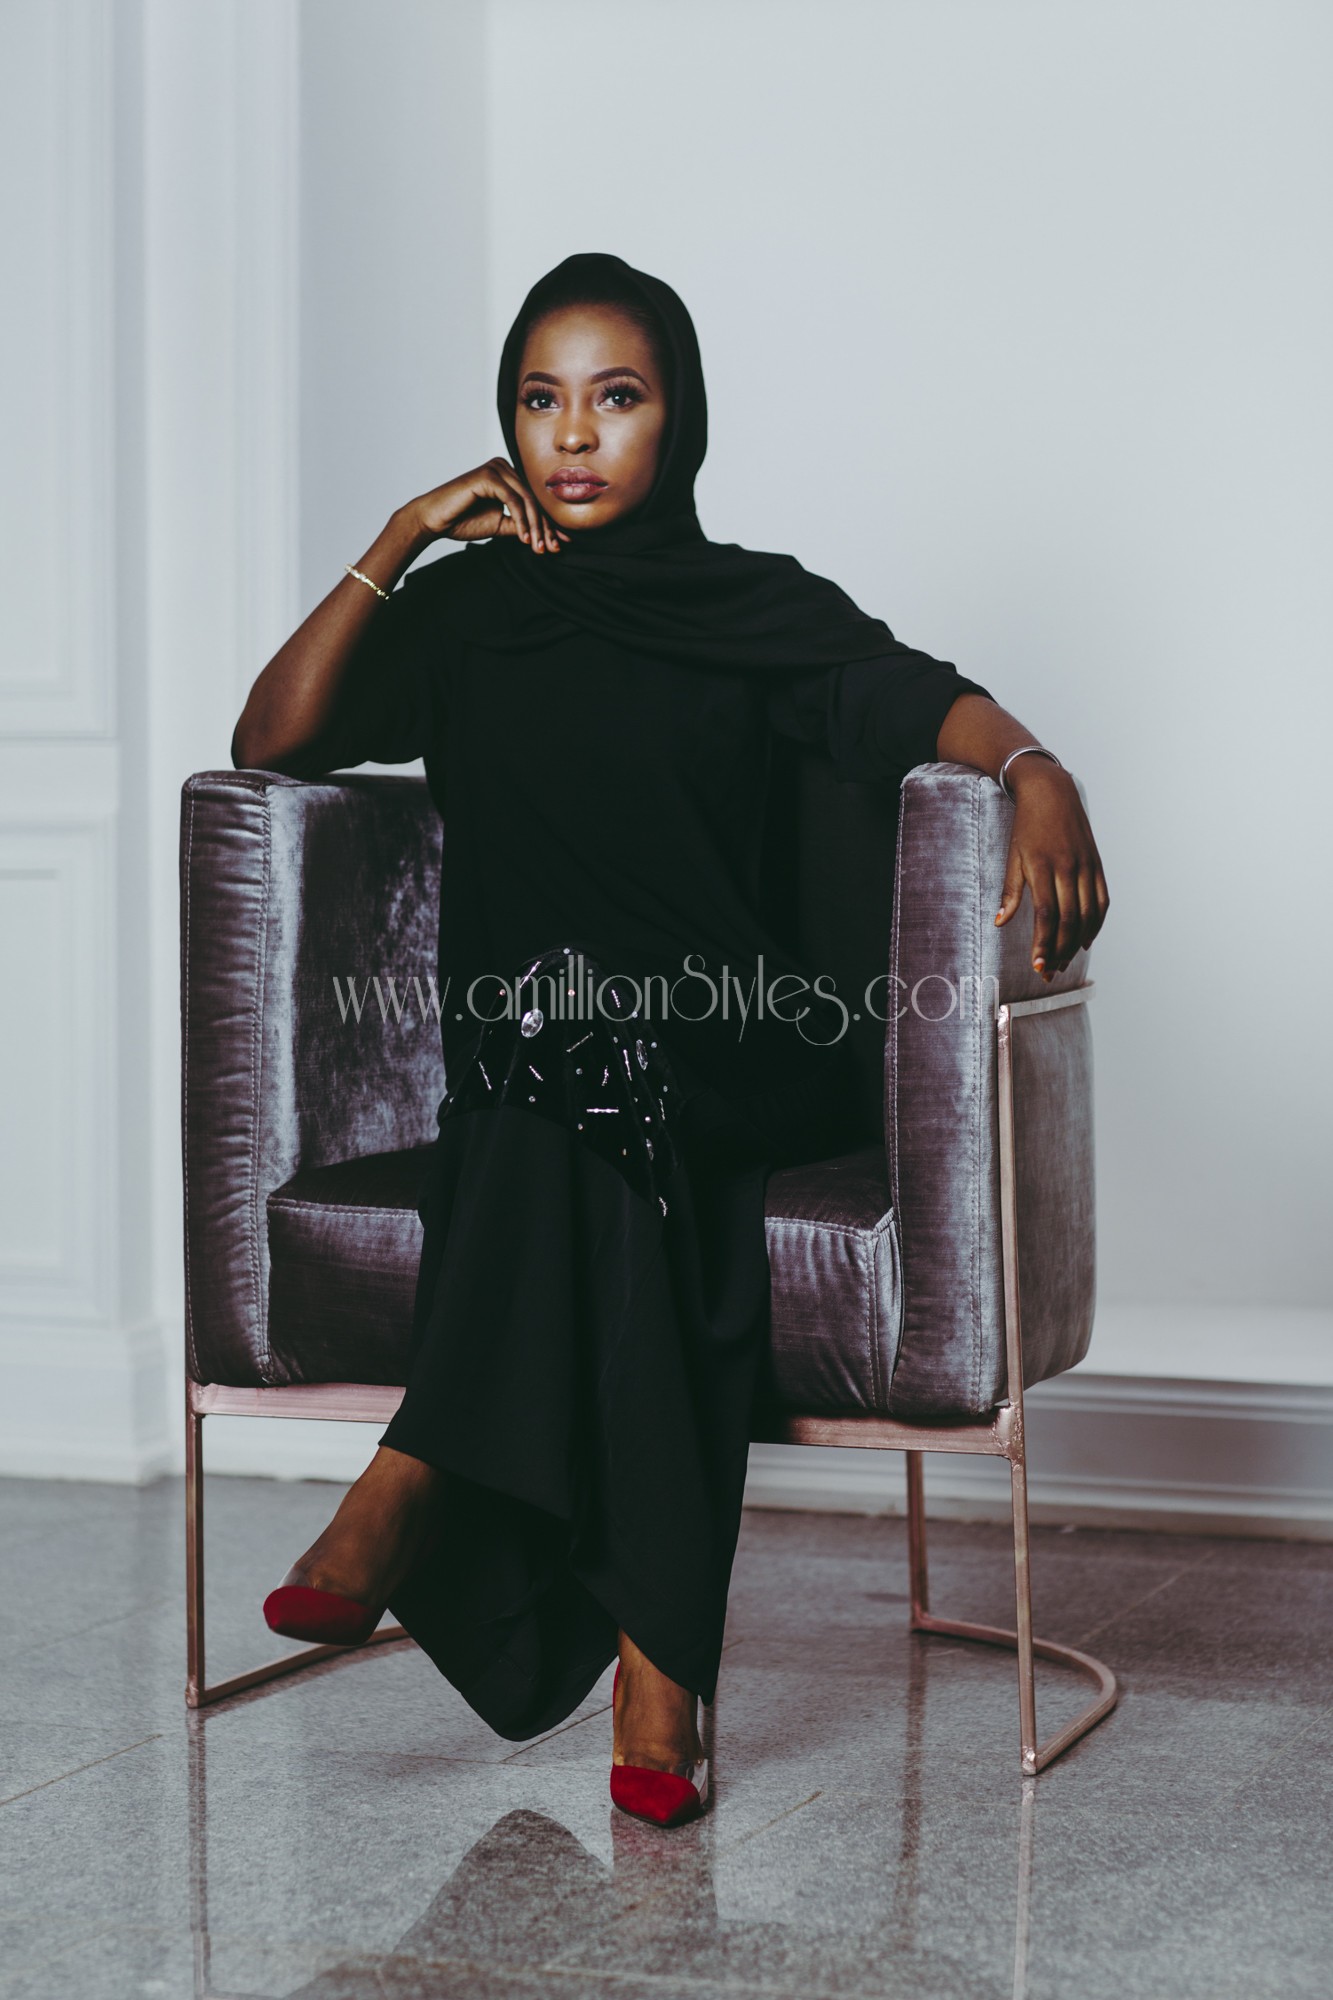 This Collection By Amnas Is Perfect For Ramadan